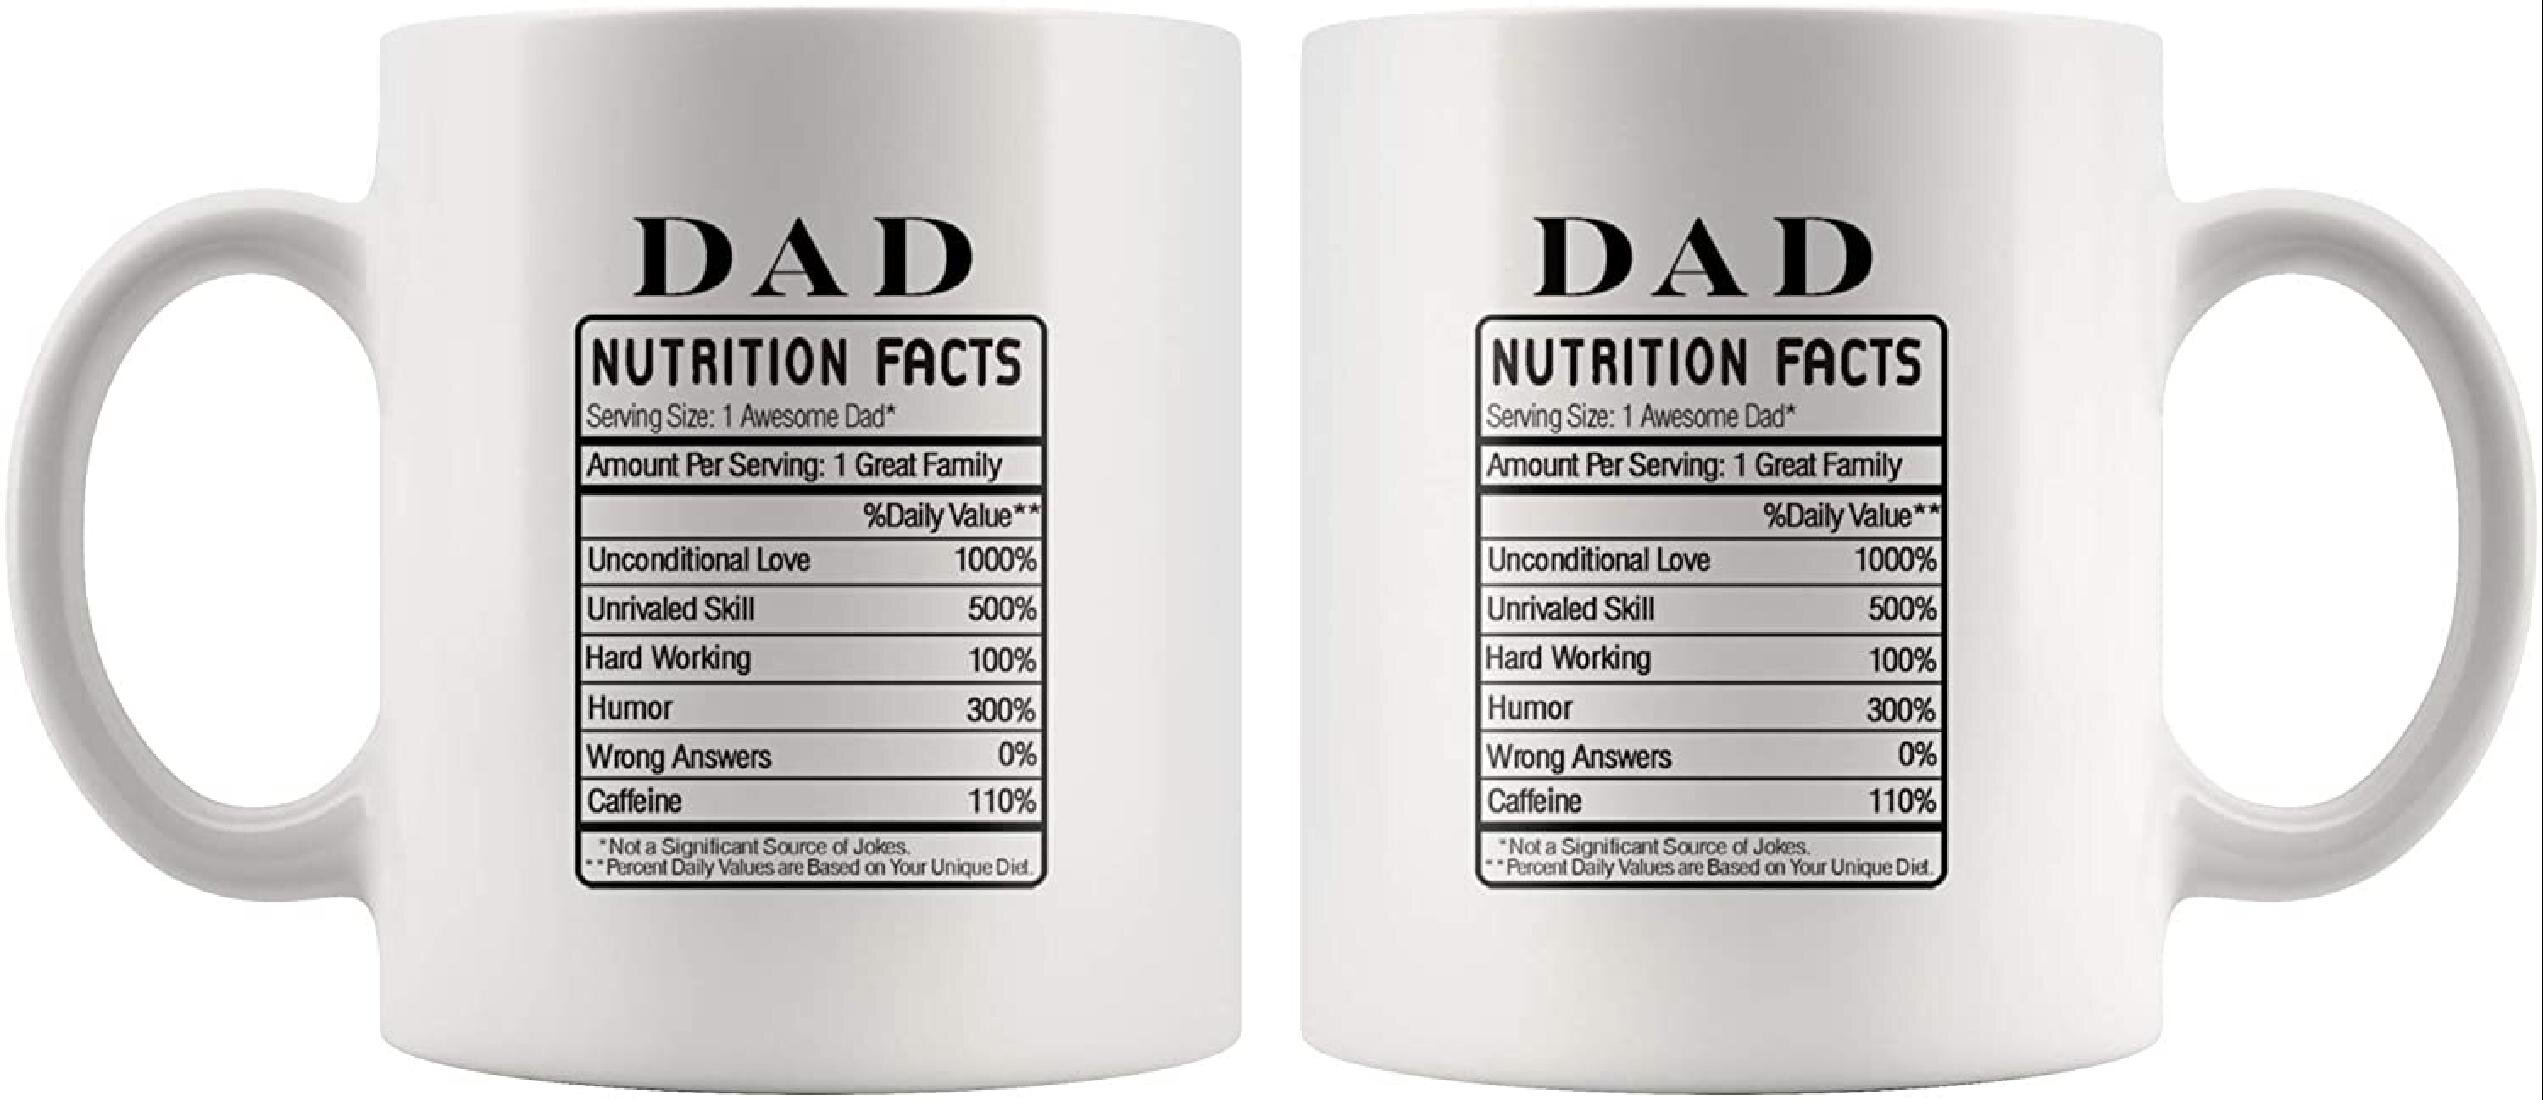 Funny Coffee Mug 1 dad Nutrition Facts White Ceramic Mug Gift for Father's Day 